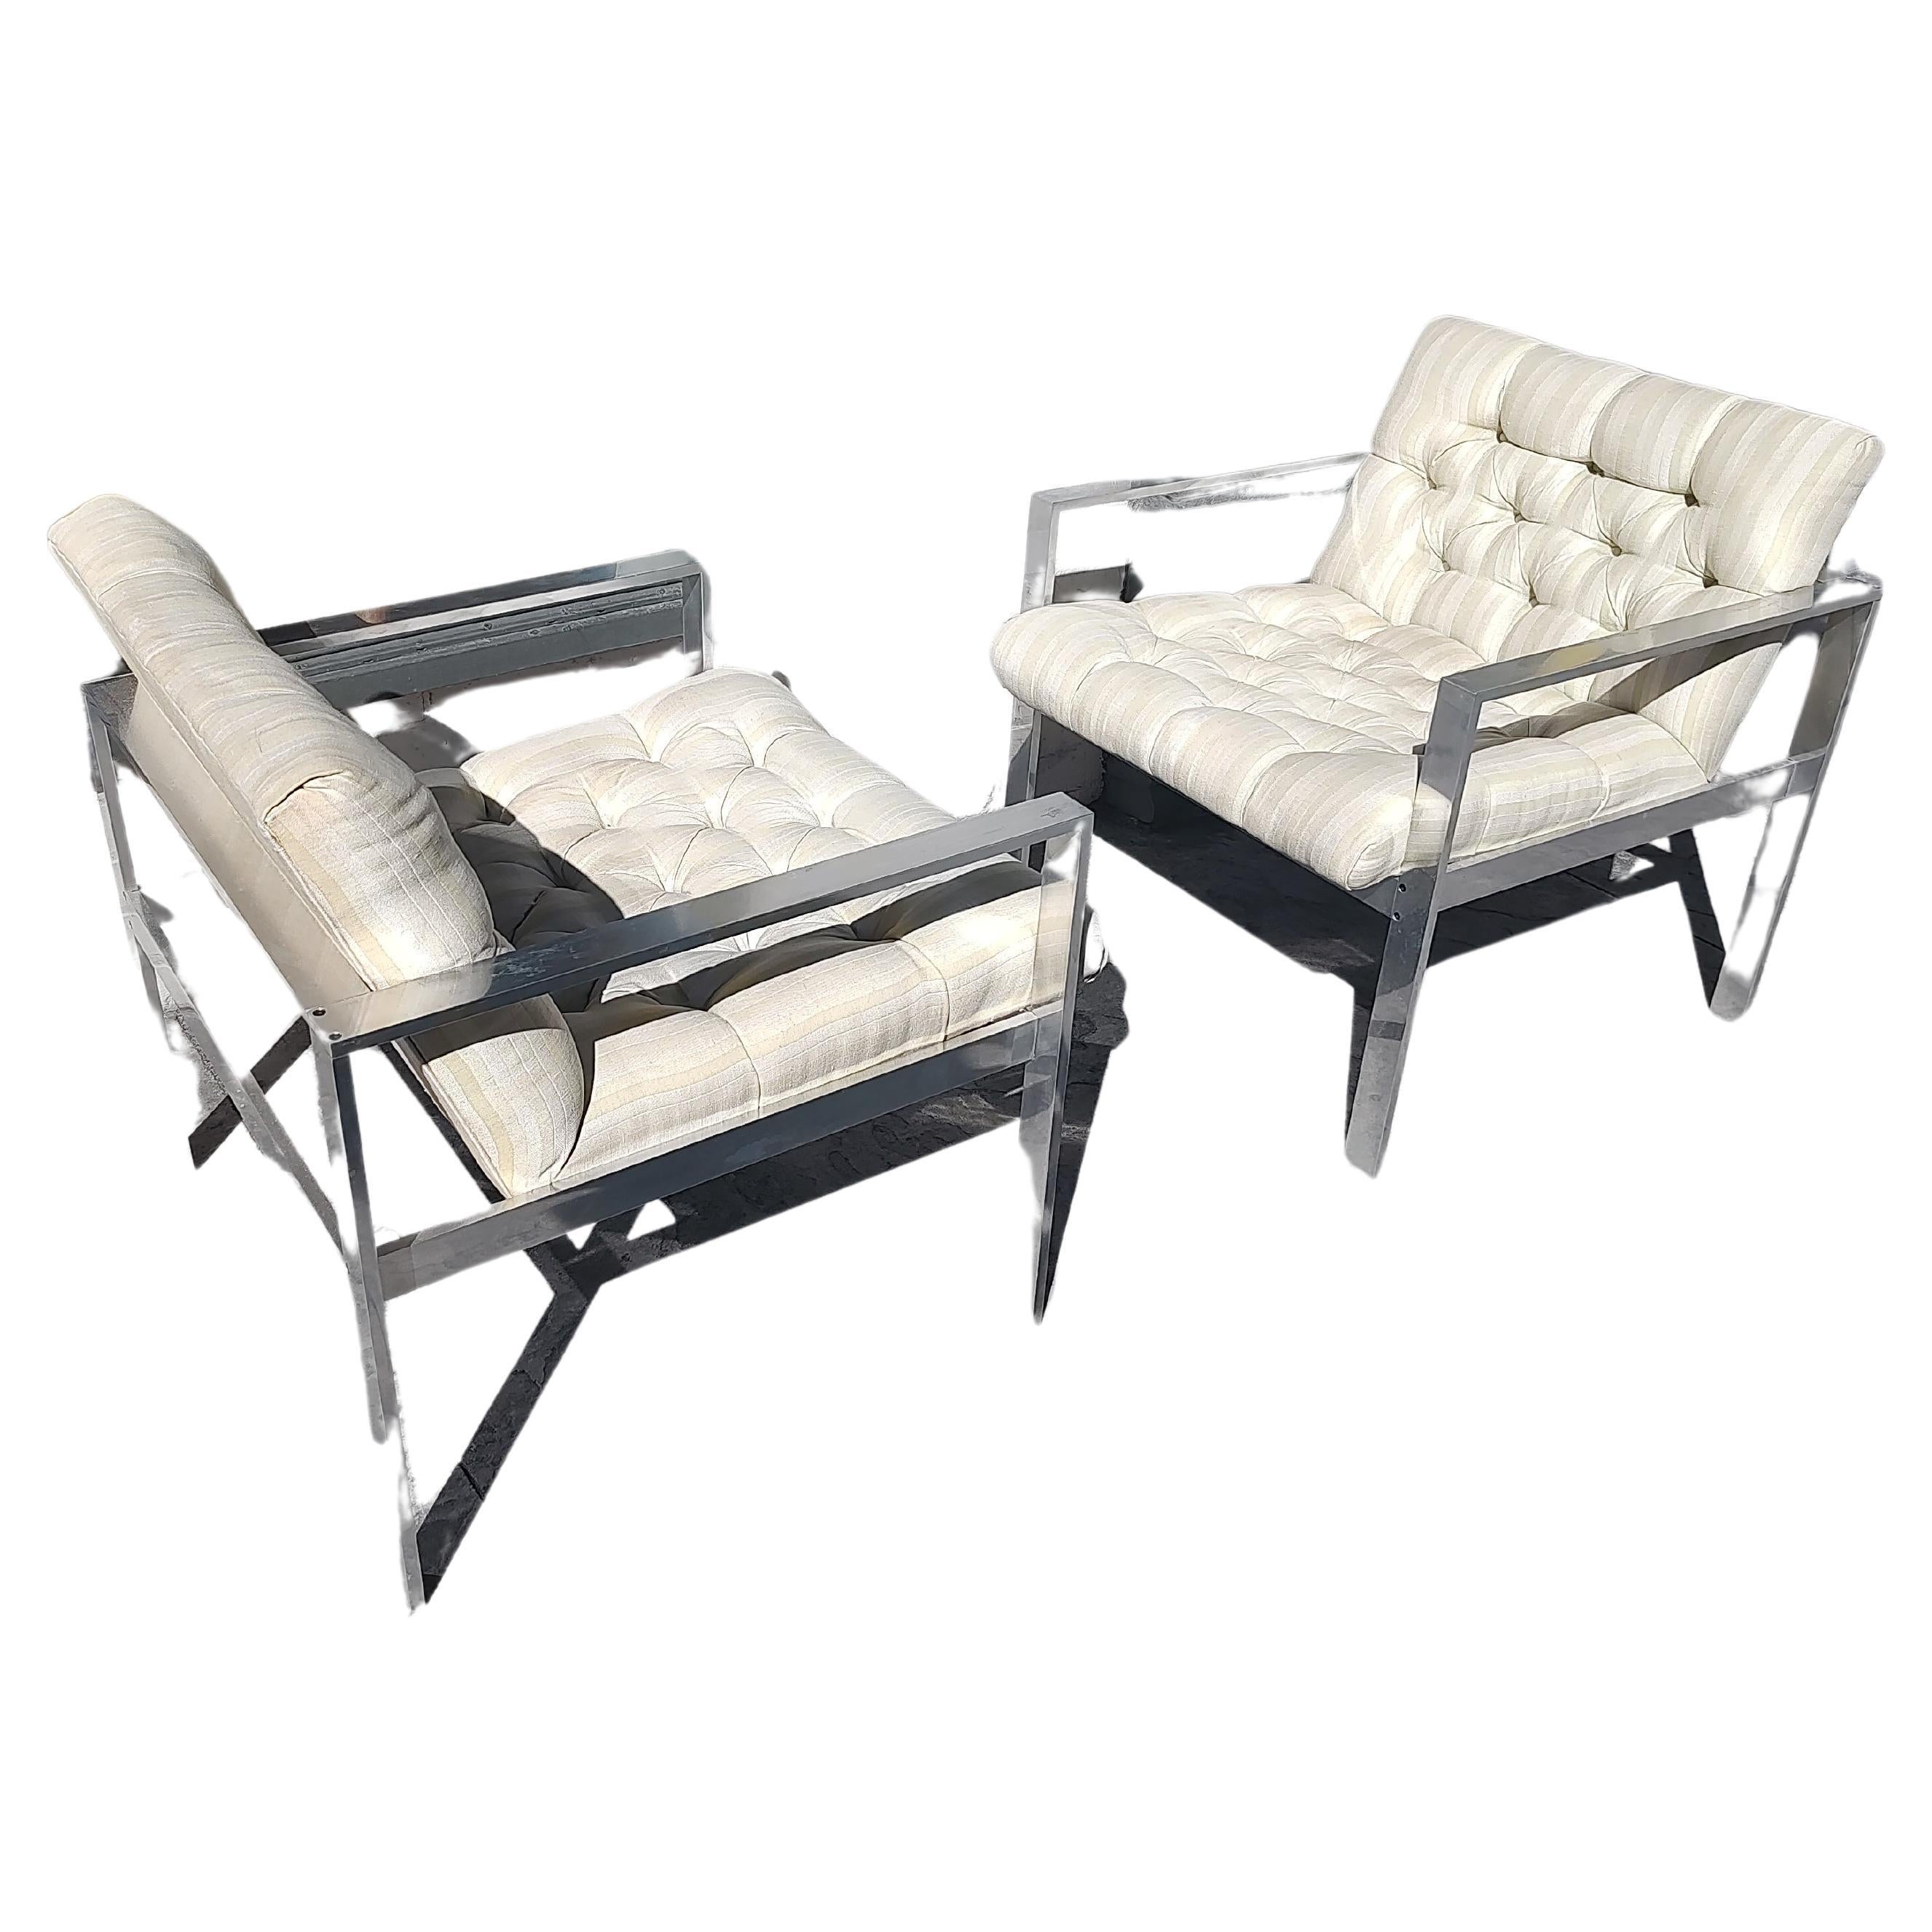 American Pair of Mid-Century Modern Tufted Aluminum Lounge Chairs by Harvey Probber For Sale